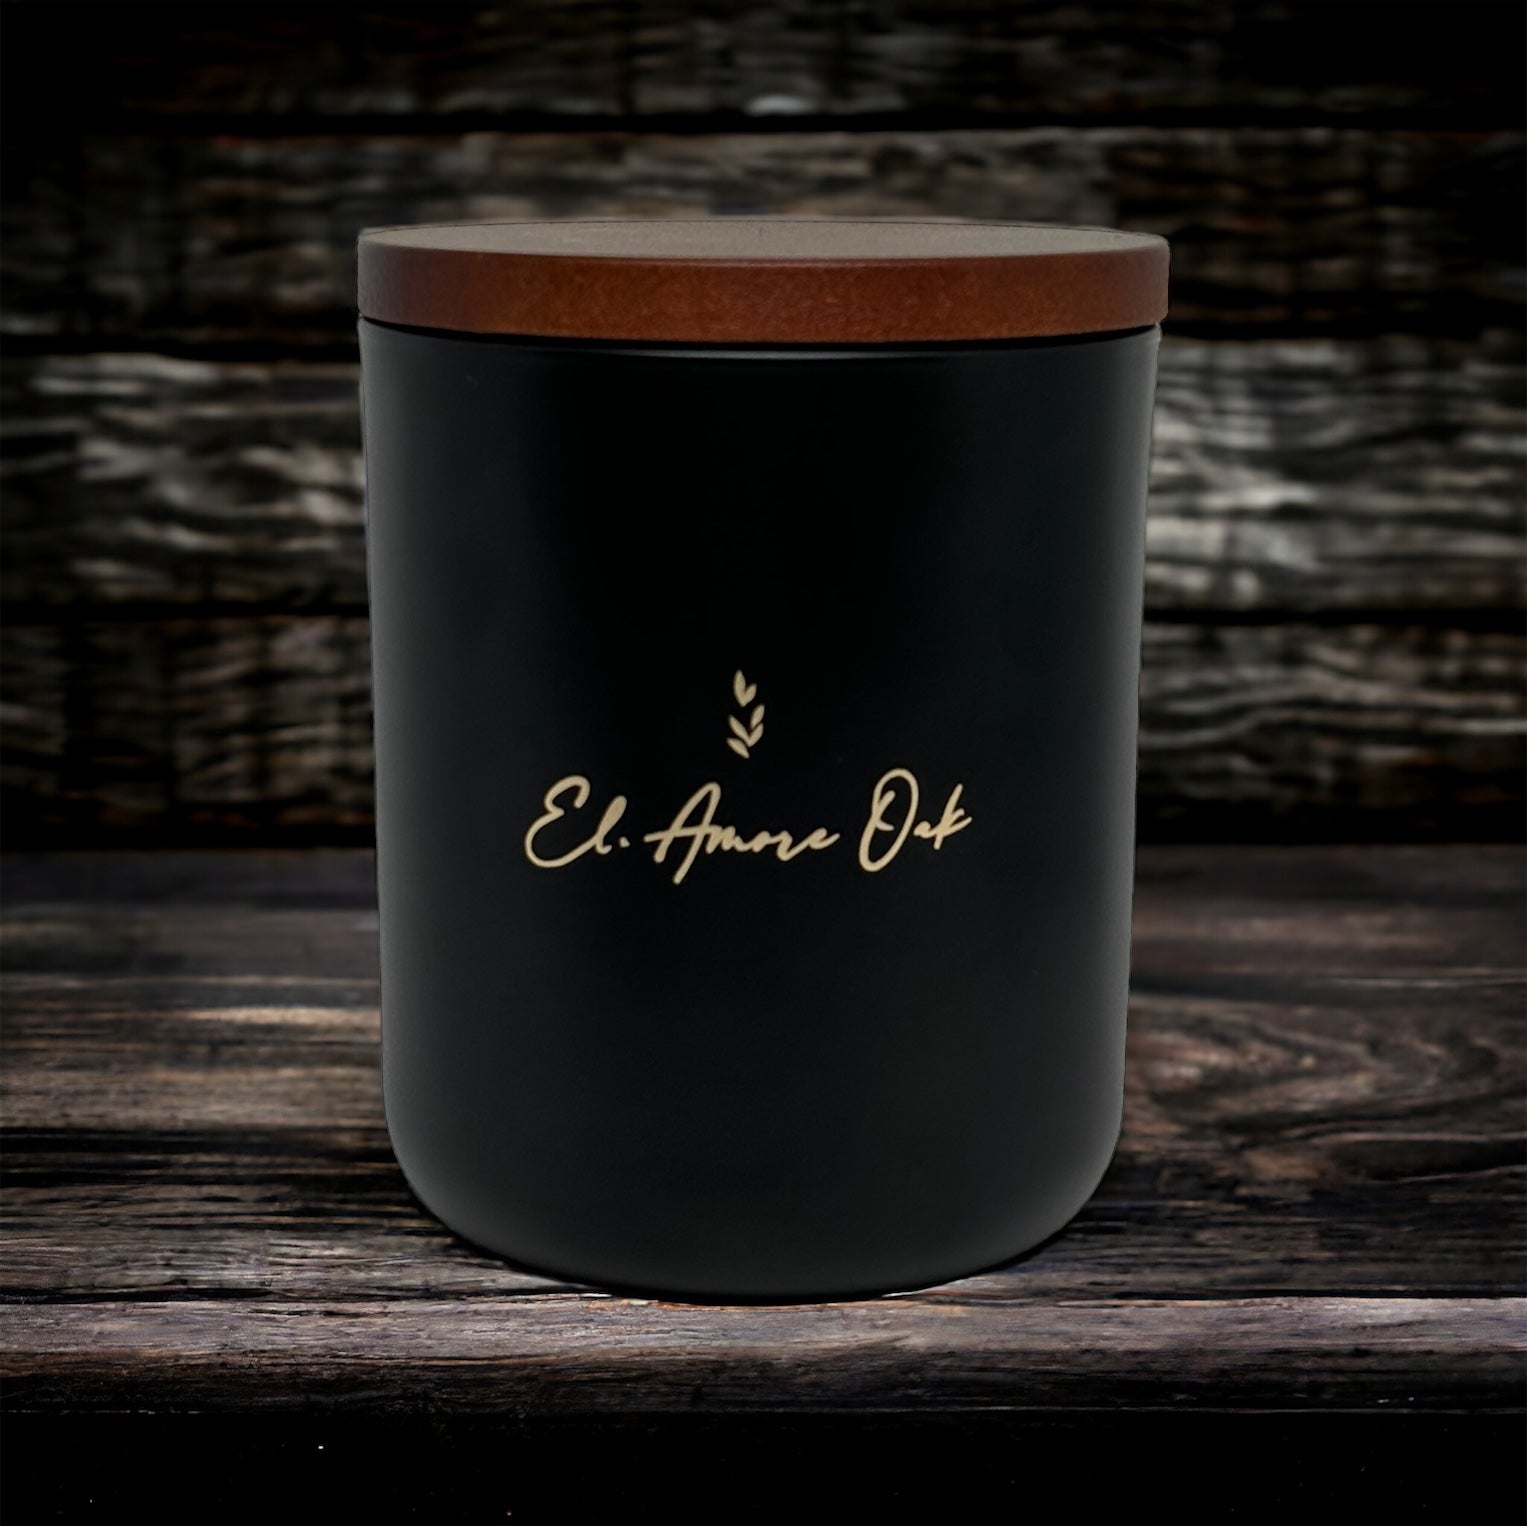 MR & MRS - Woody Leather & Brandy - Our Signature Scent